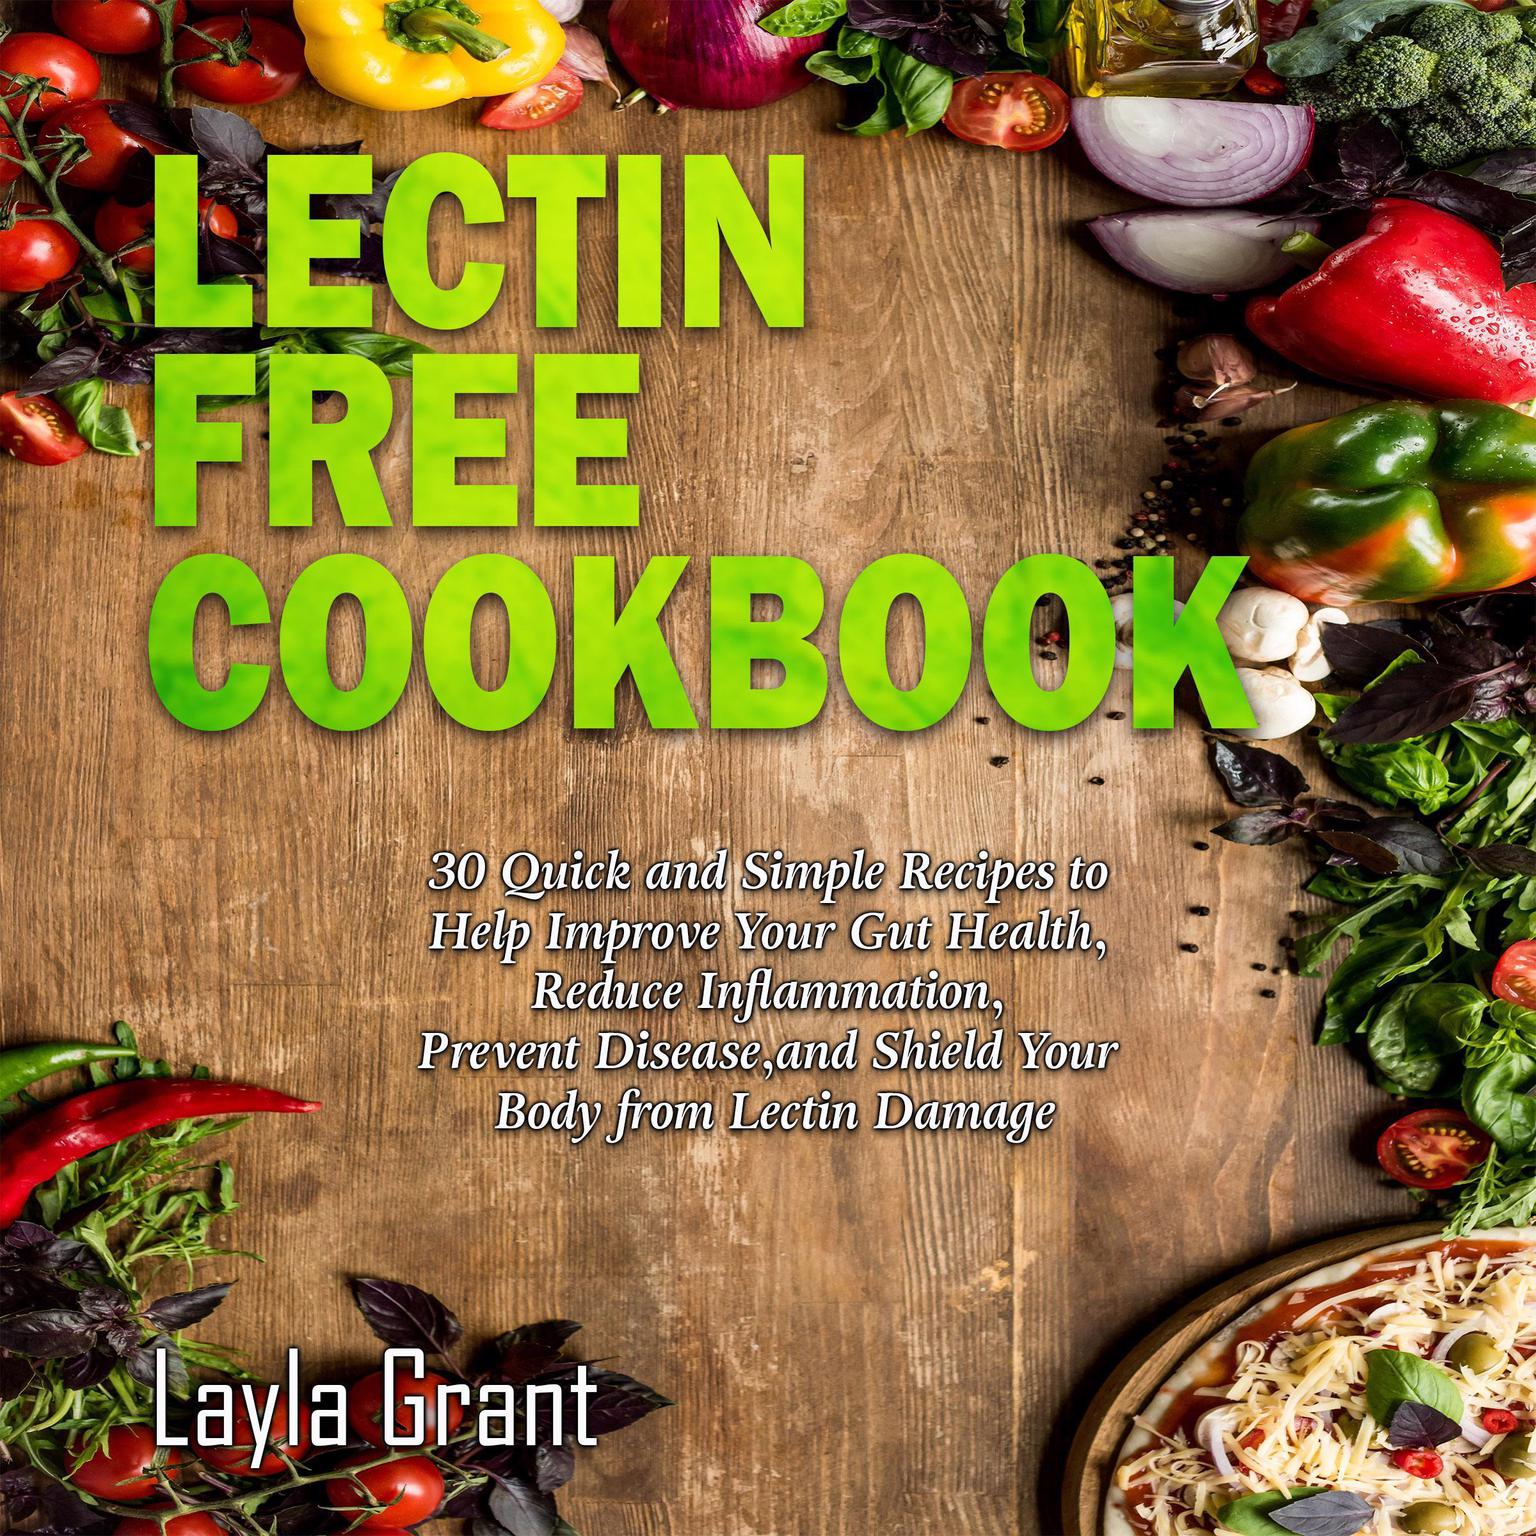 LECTIN-FREE COOKBOOK: 30 Simple, Quick, and Easy Recipes to Help You Improve Your Health, Reduce Inflammation, Prevent Risk of a Disease, and Shield Your Gut from Lectin Damage Audiobook, by Layla Grant